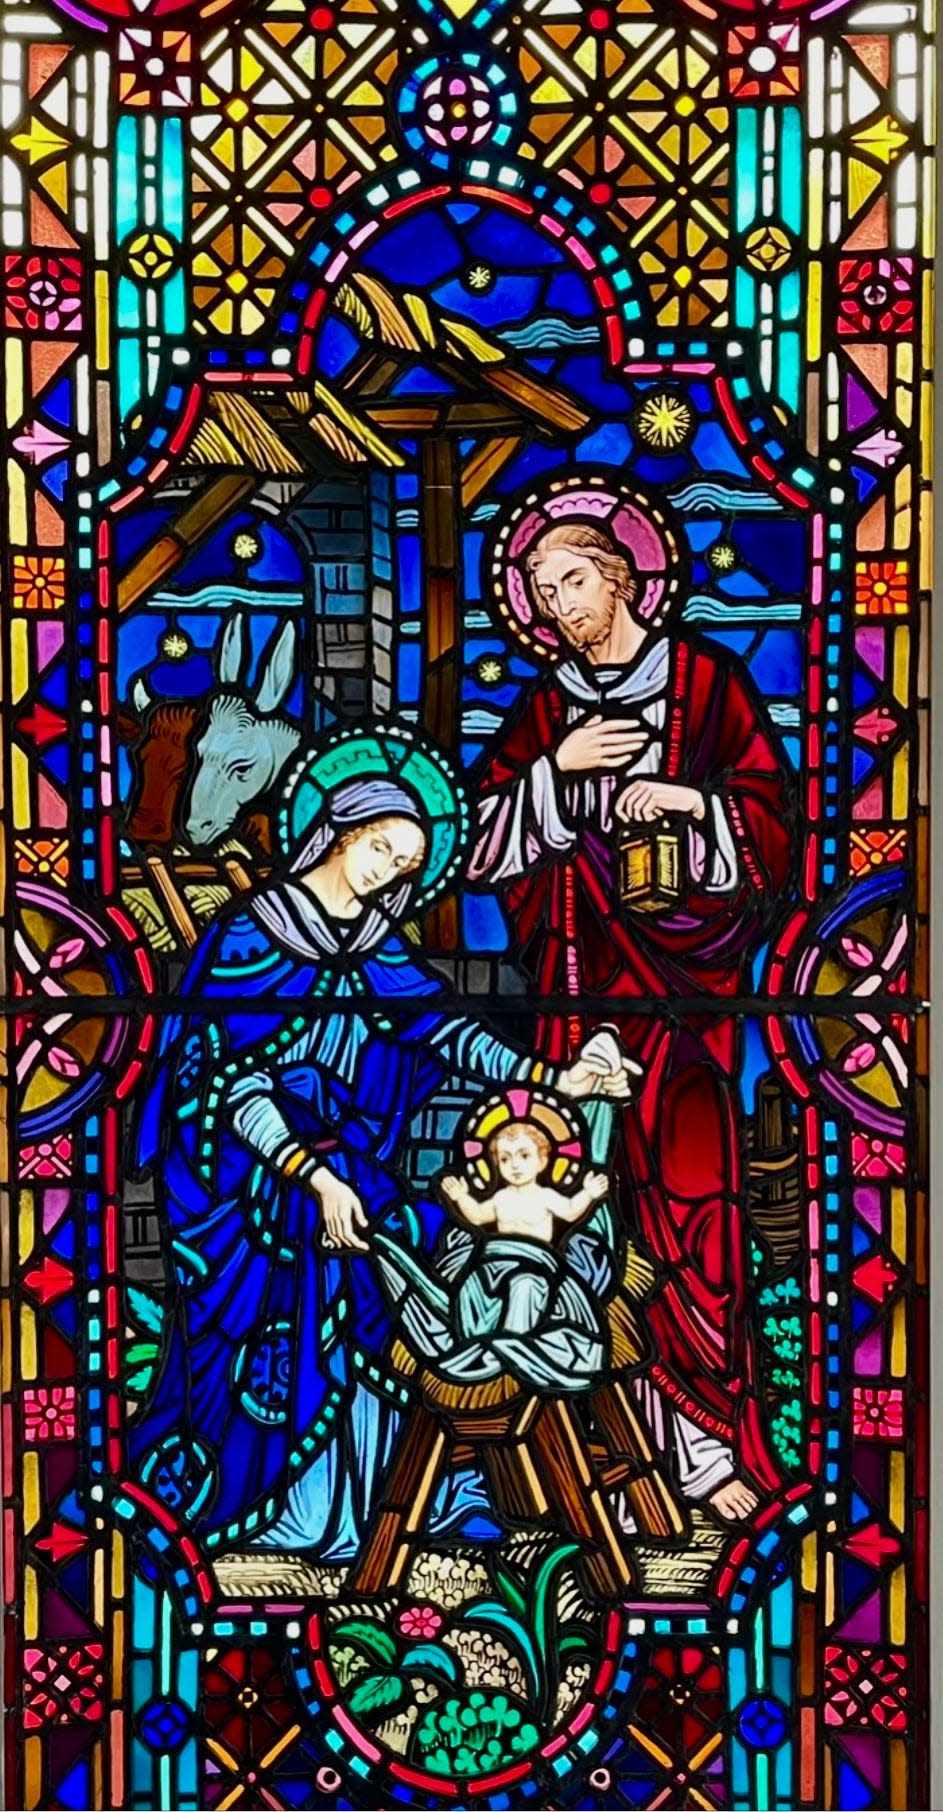 Donna Barron never felt like the owner of this stained glass window but more like its caretaker. The window is estimated to be over 100 years old and once belonged to a German church that removed all its stained glass during World War I and divided them among different parishioners.